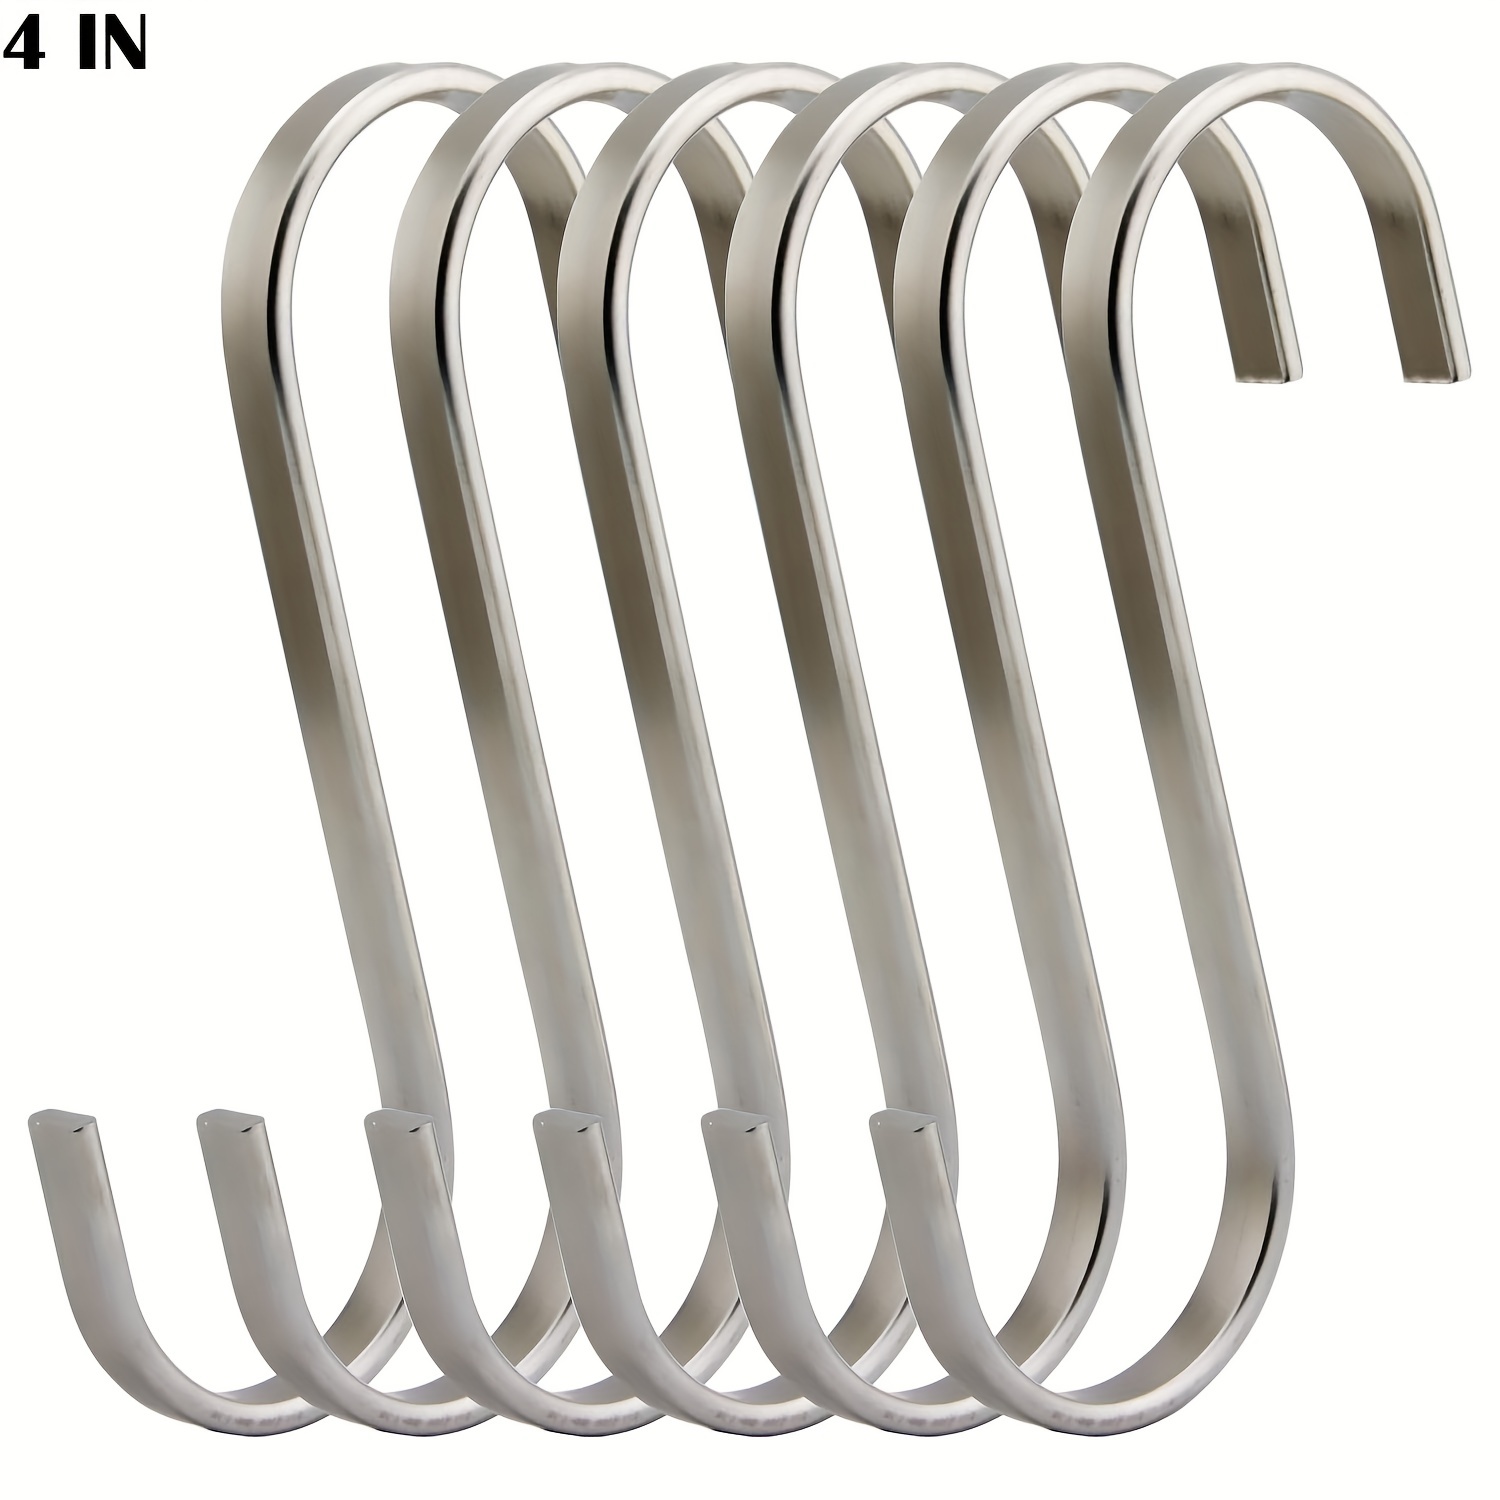 6pcs Double-Sided Stainless Steel S Hook for Hanging Clothes, Cookers,  Toiletries - Versatile Kitchen, Bathroom, Bedroom, and Office Storage  Solution